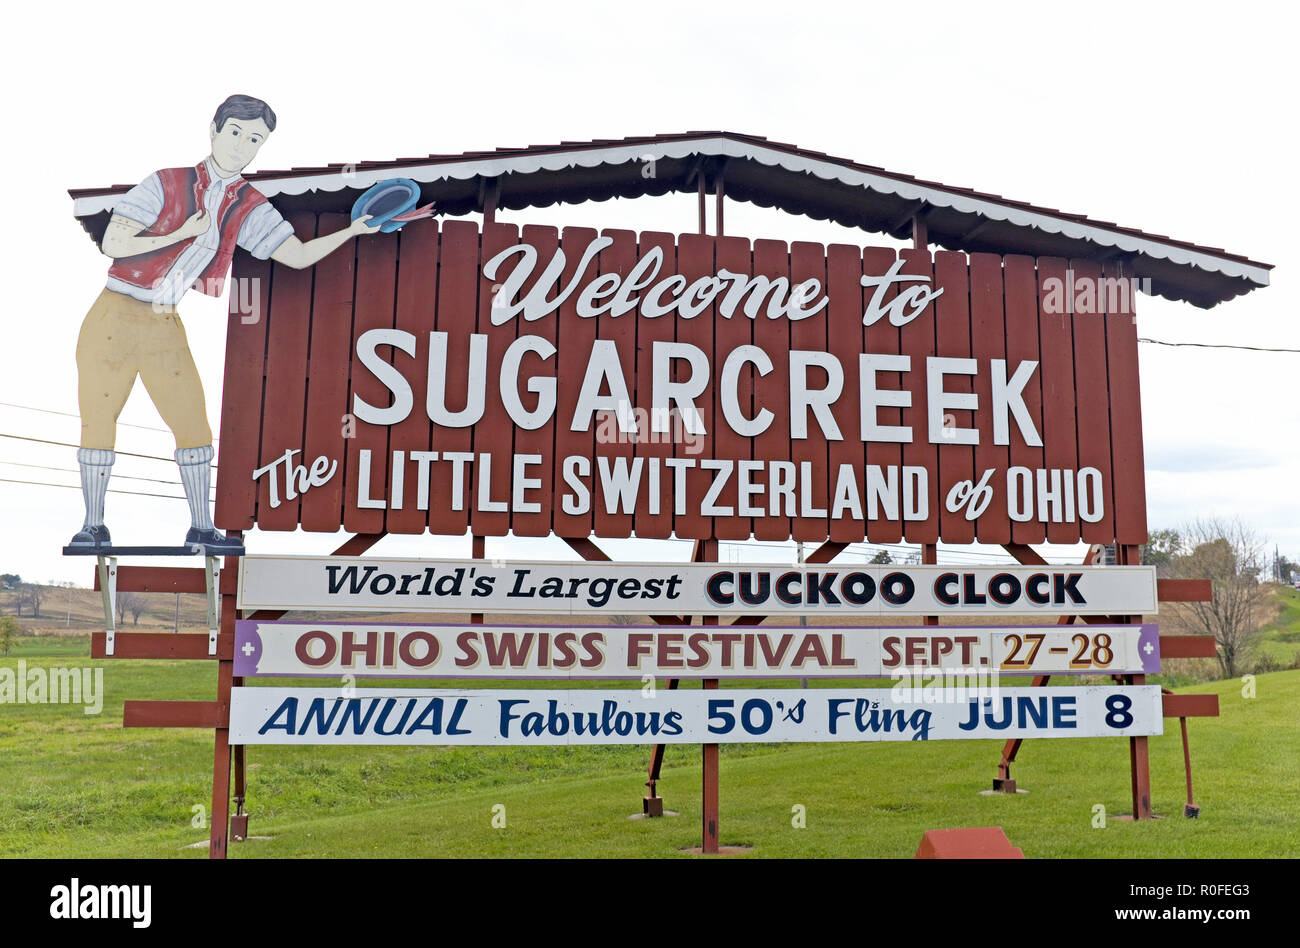 A 'Welcome to Sugarcreek: The Little Switzerland of Ohio' sign welcomes travelers to the Ohio Amish country town of Sugarcreek. Stock Photo